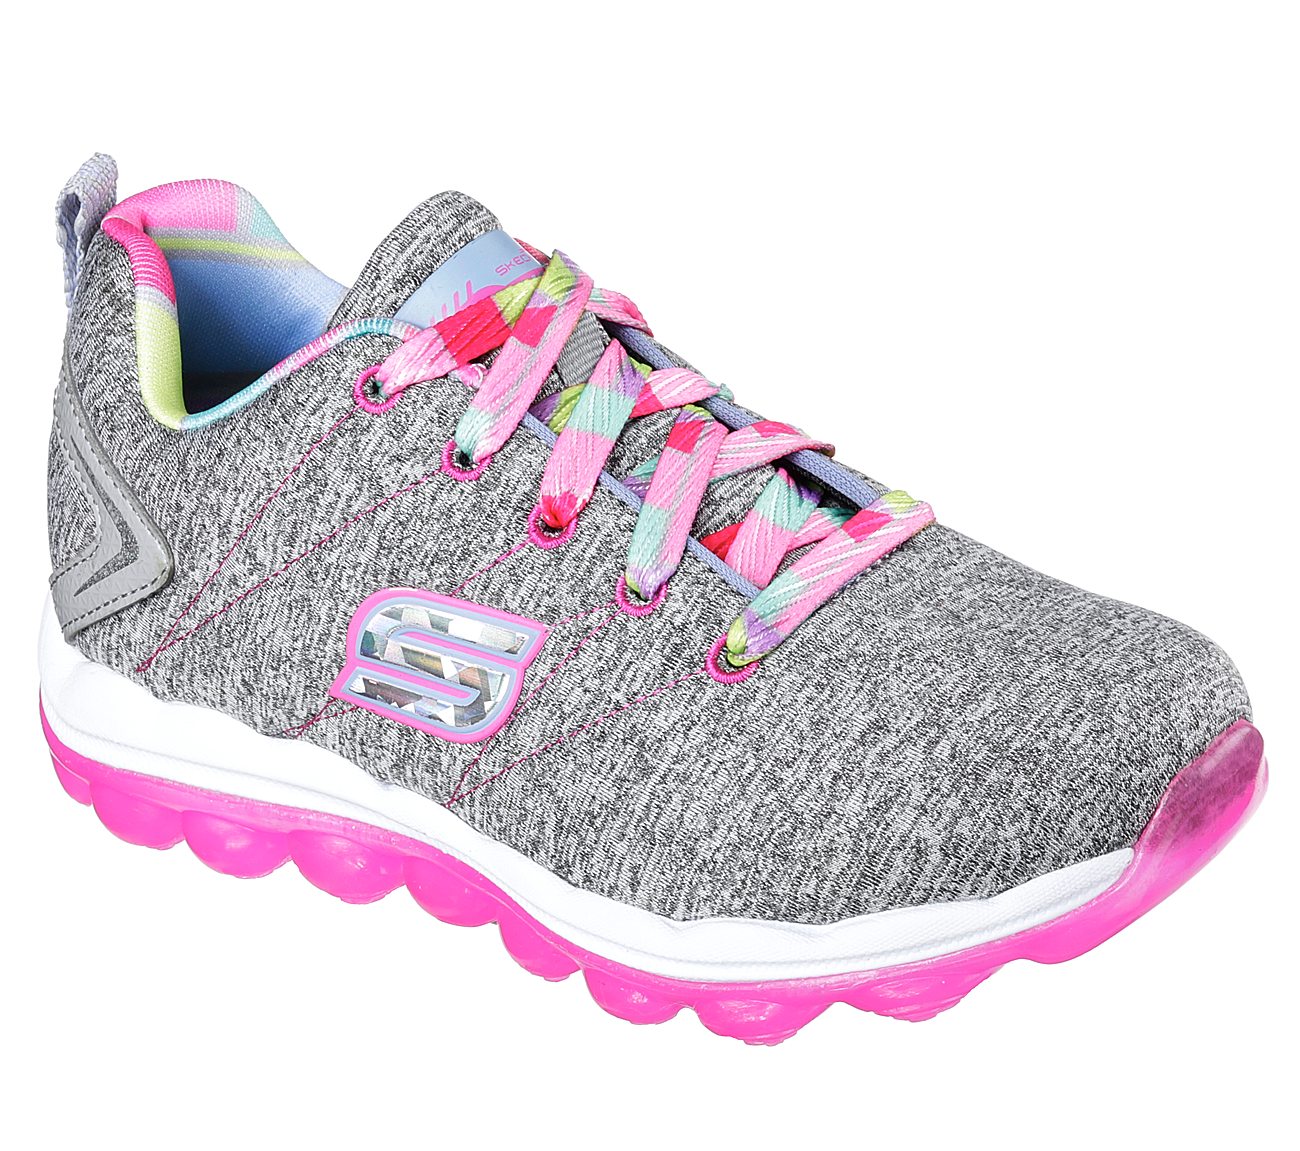 GIRLS SKECHERS RELAXED FIT AIR COOL MEMORY FOAM LACE UP WALKING TRAINERS SHOES